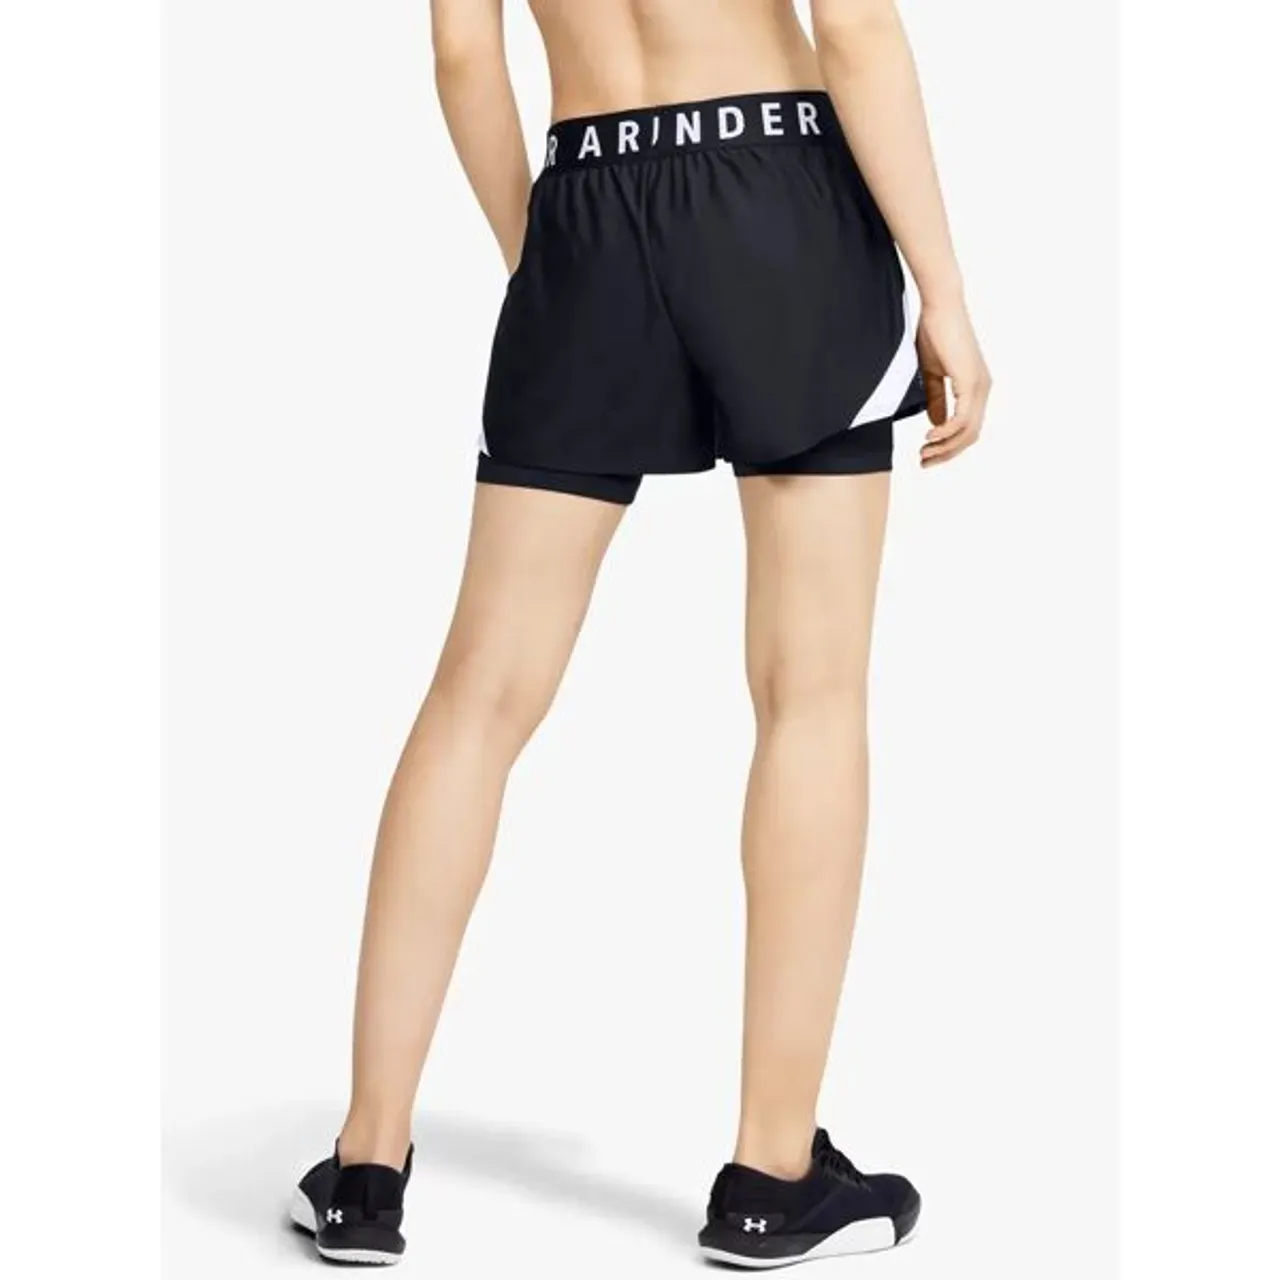 Under Armour Play Up 2-in-1 Training Shorts, Black/White - Black/White - Female